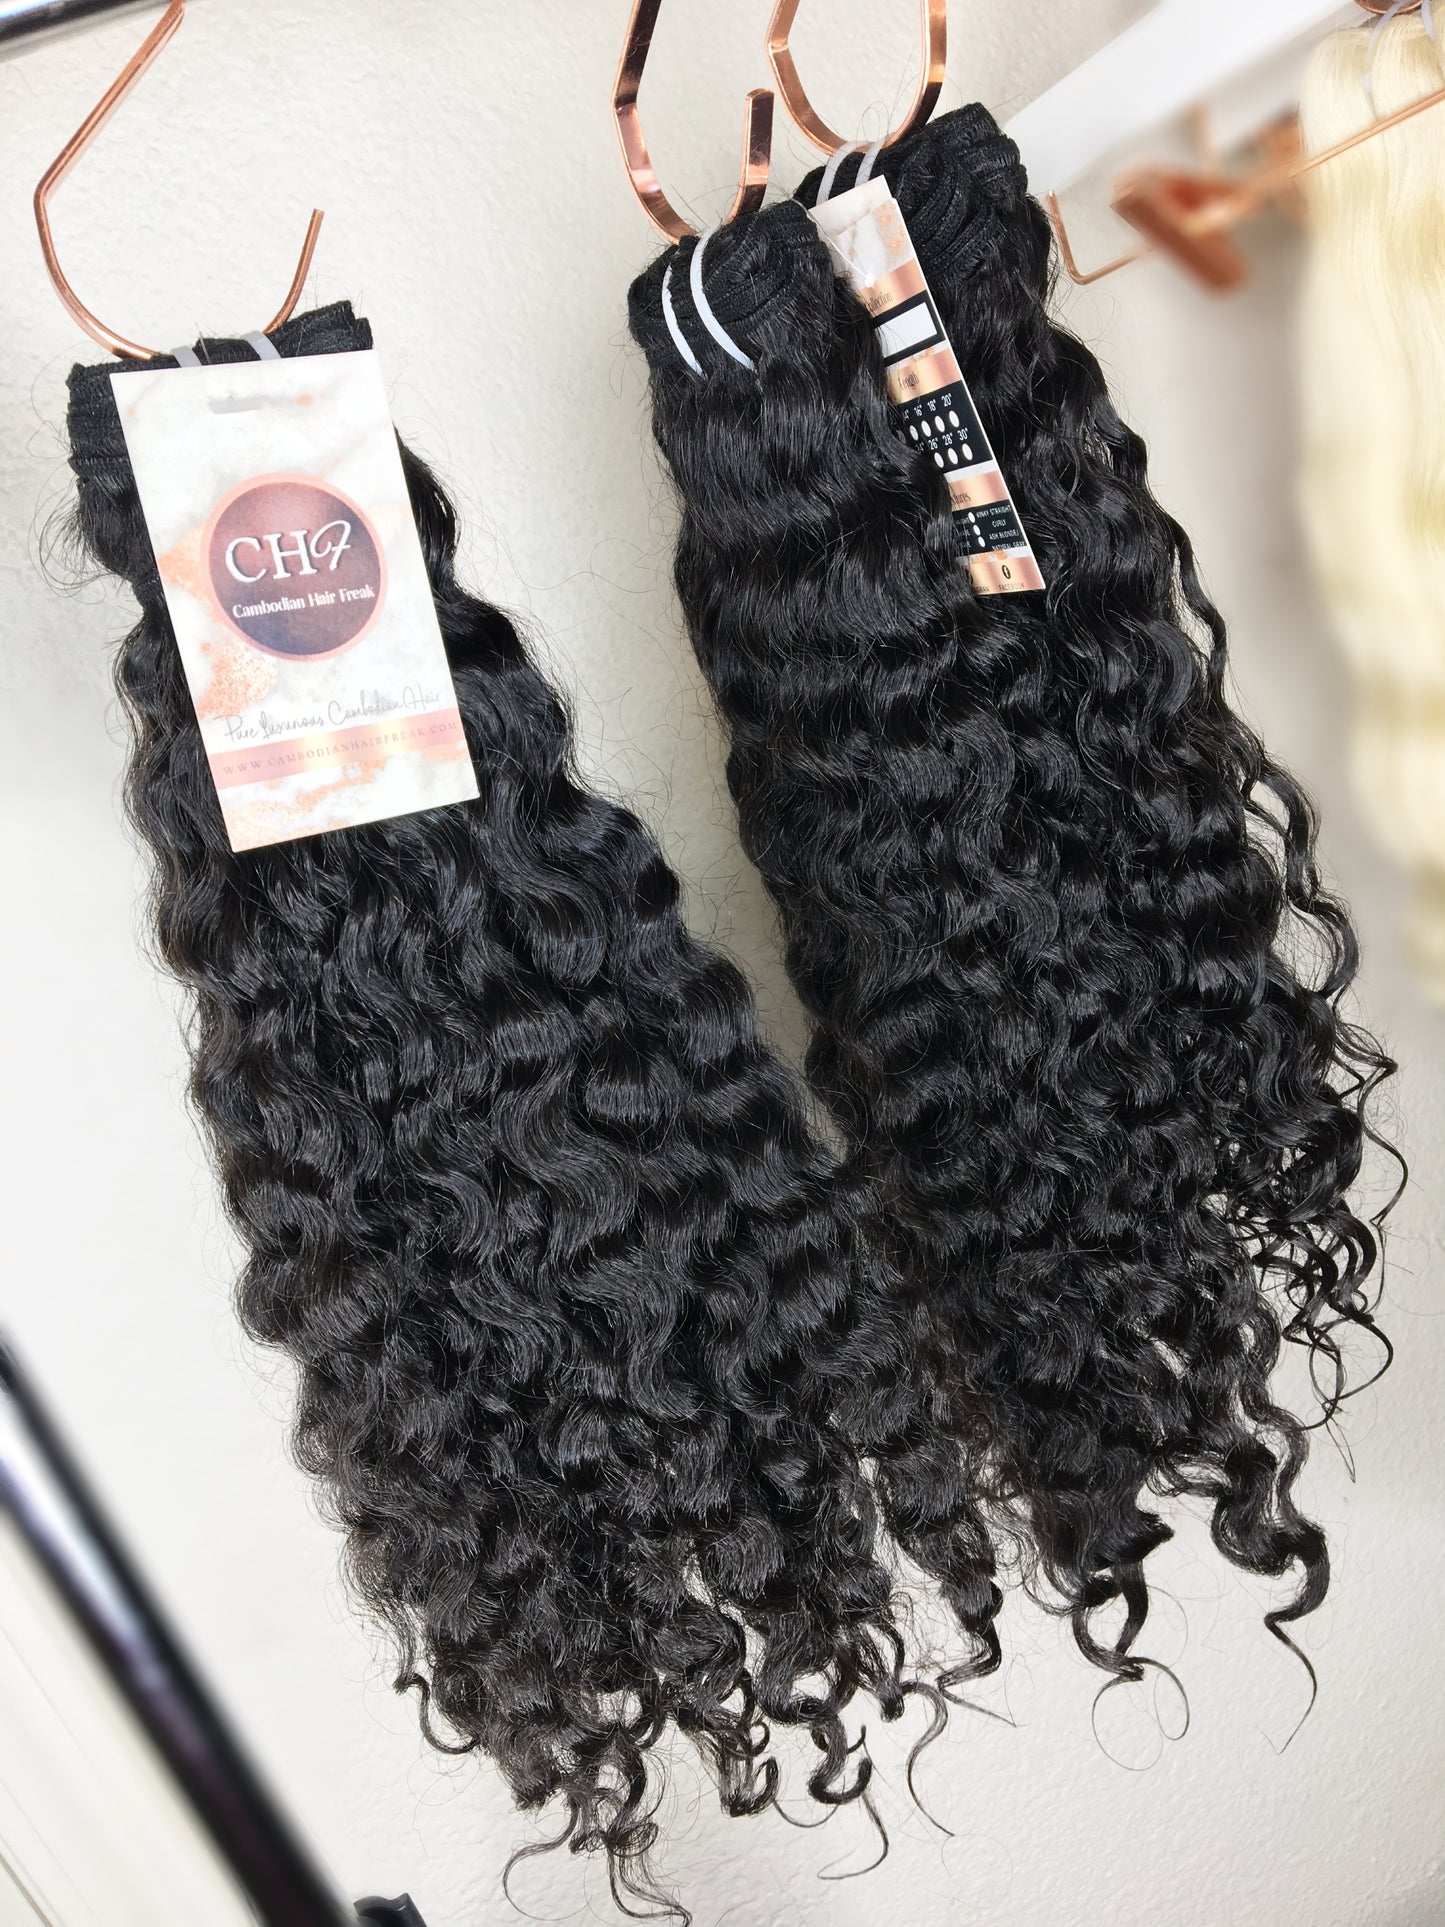 Pure Cambodian Curly Hair Extensions - Cambodian Hair Freak LLC 